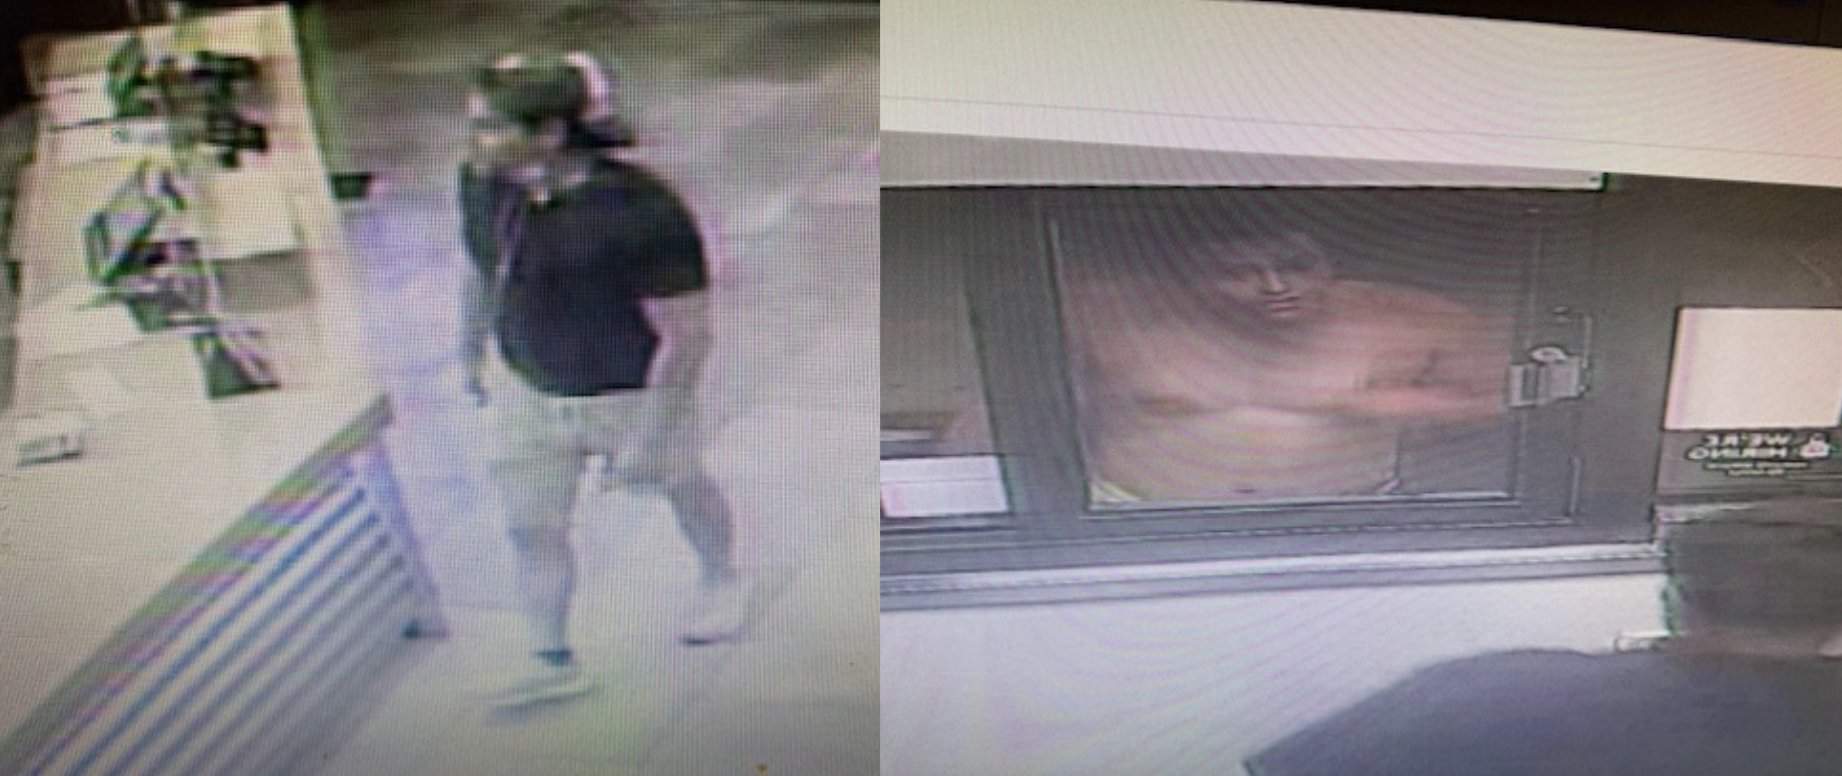 HCSO searching for man who they say threatened Taco Bell employees in Cypress